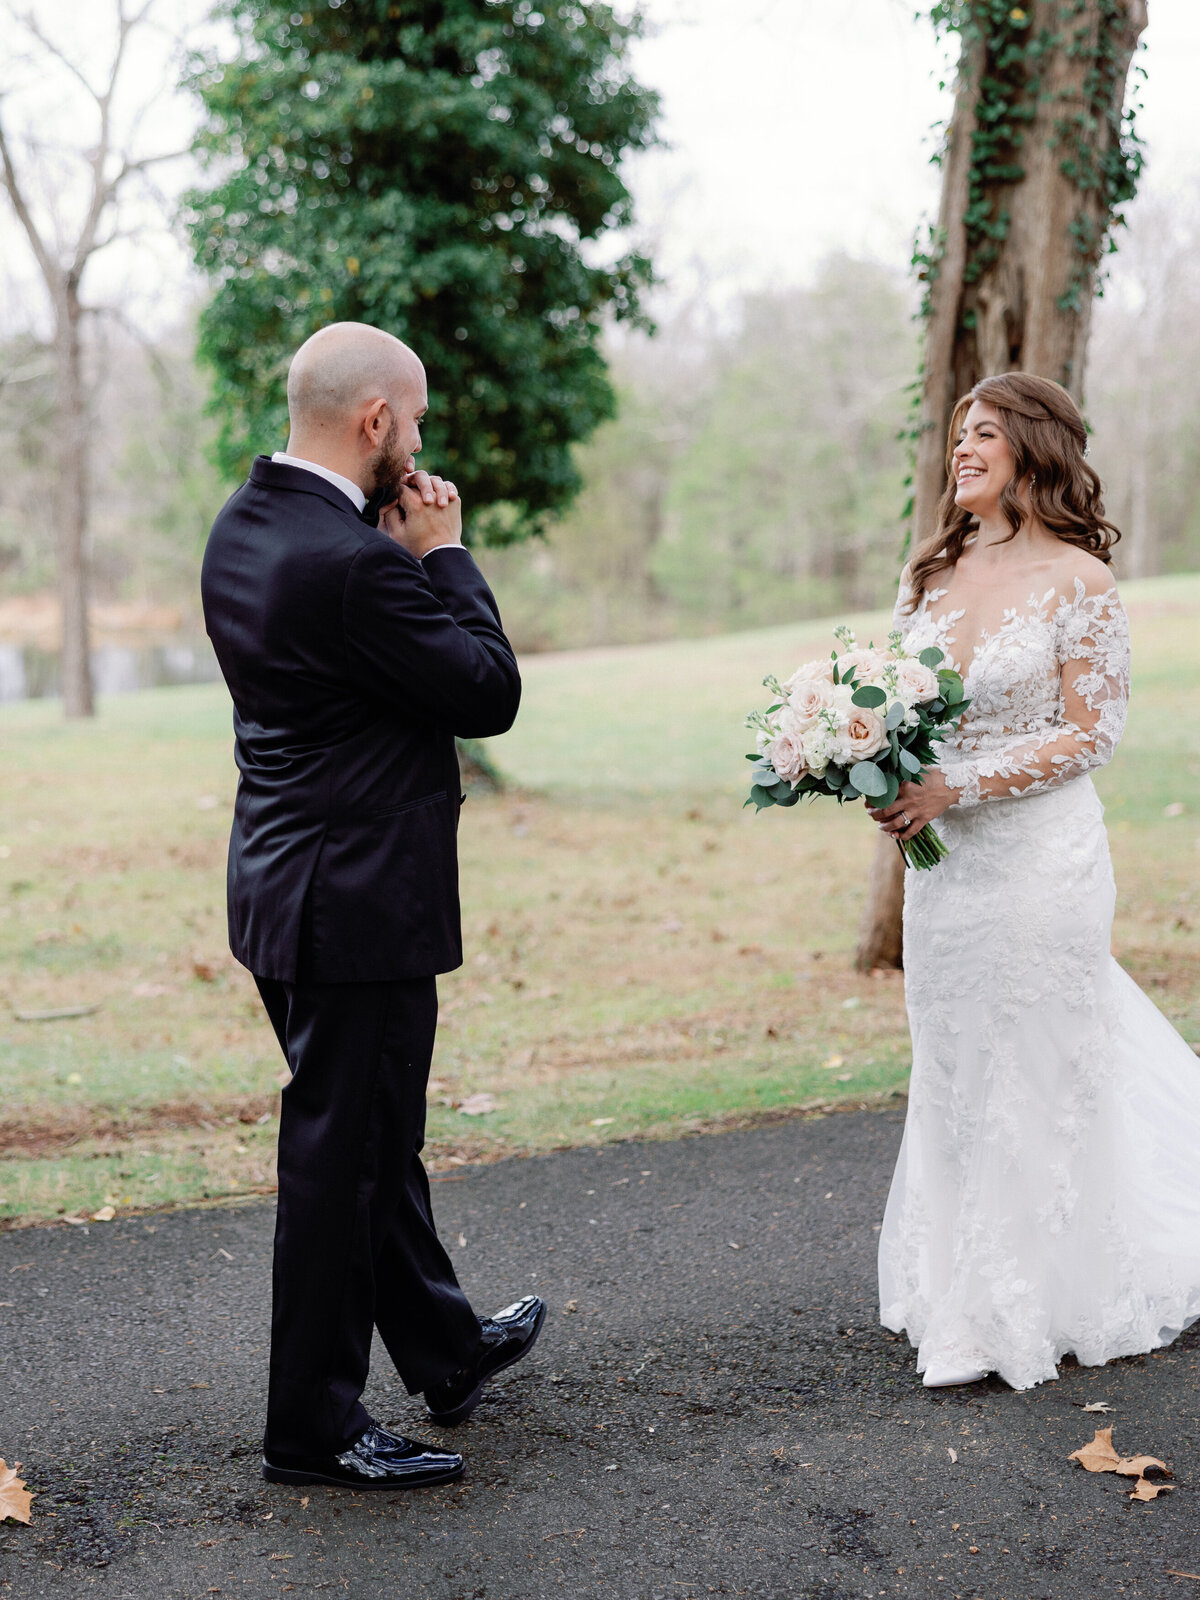 A groom sees his bride for the first time on their wedding day and becomes emotional